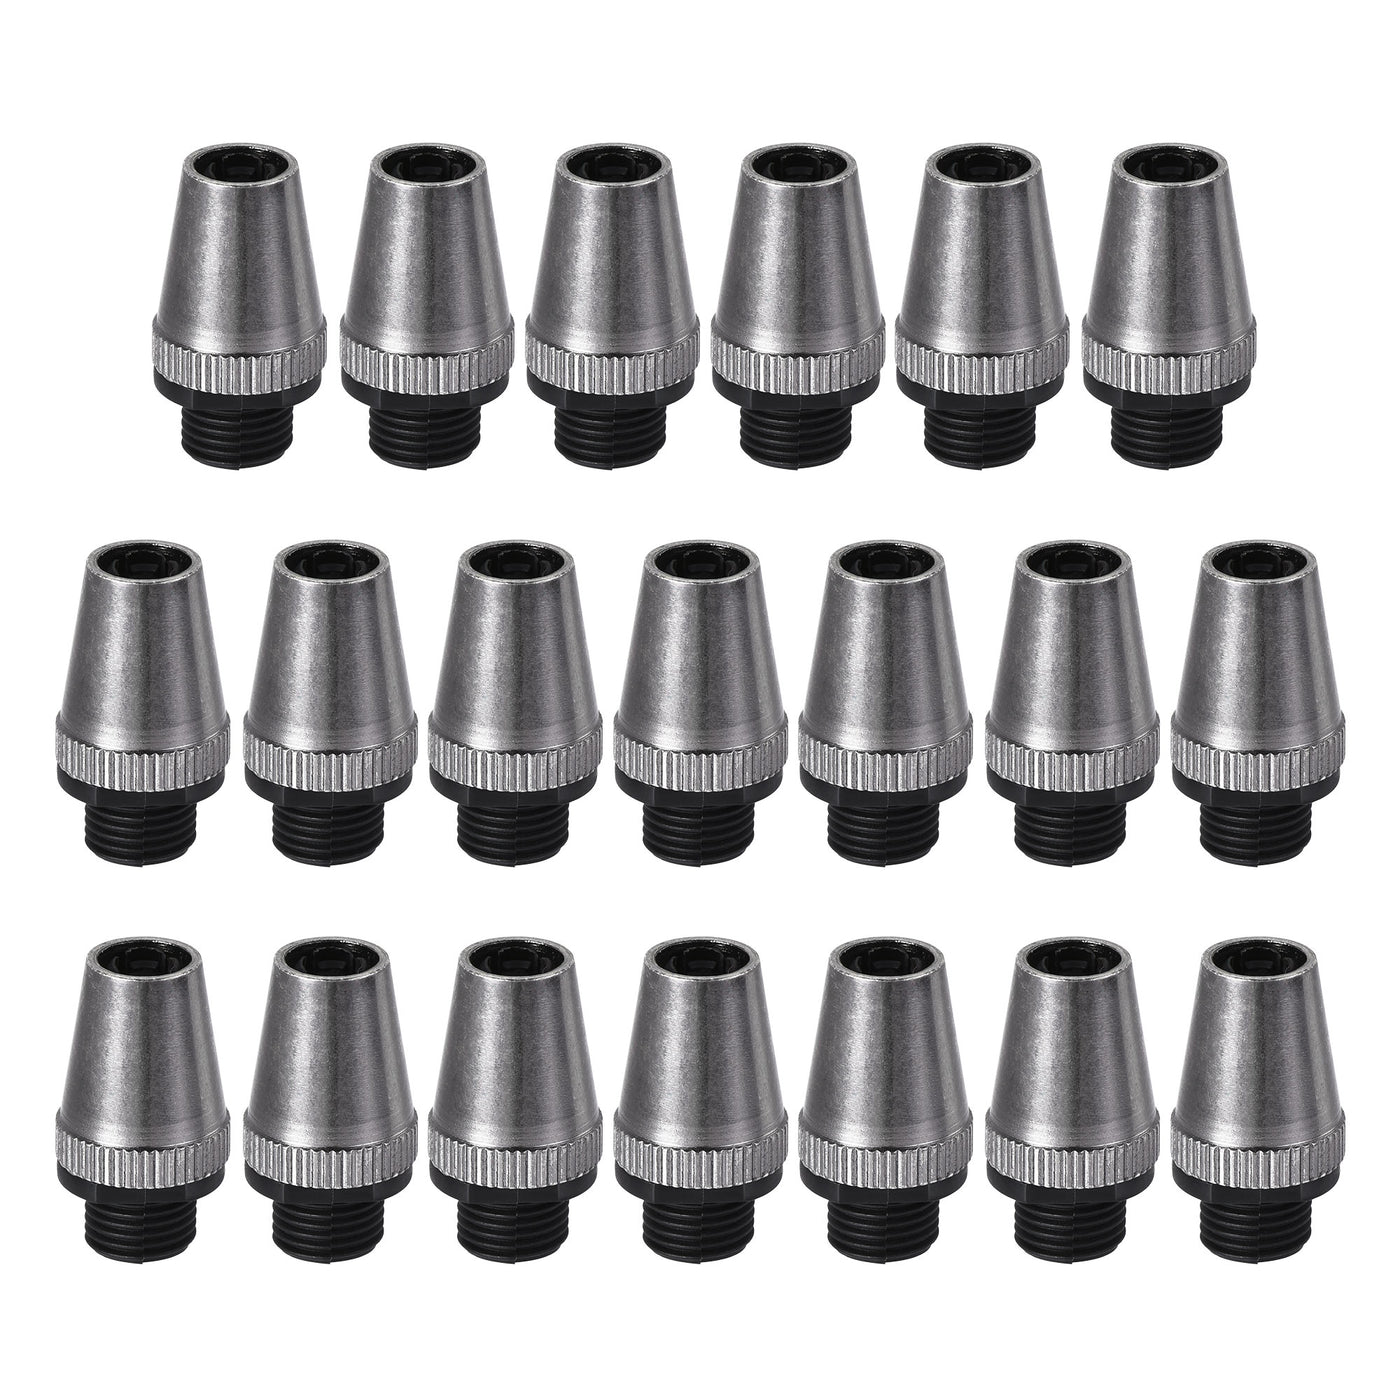 uxcell Uxcell Cable Glands Strain Relief Cord Grips Metal Black 20Pcs for Wiring Hanging Light Ceiling Pendant Lamp